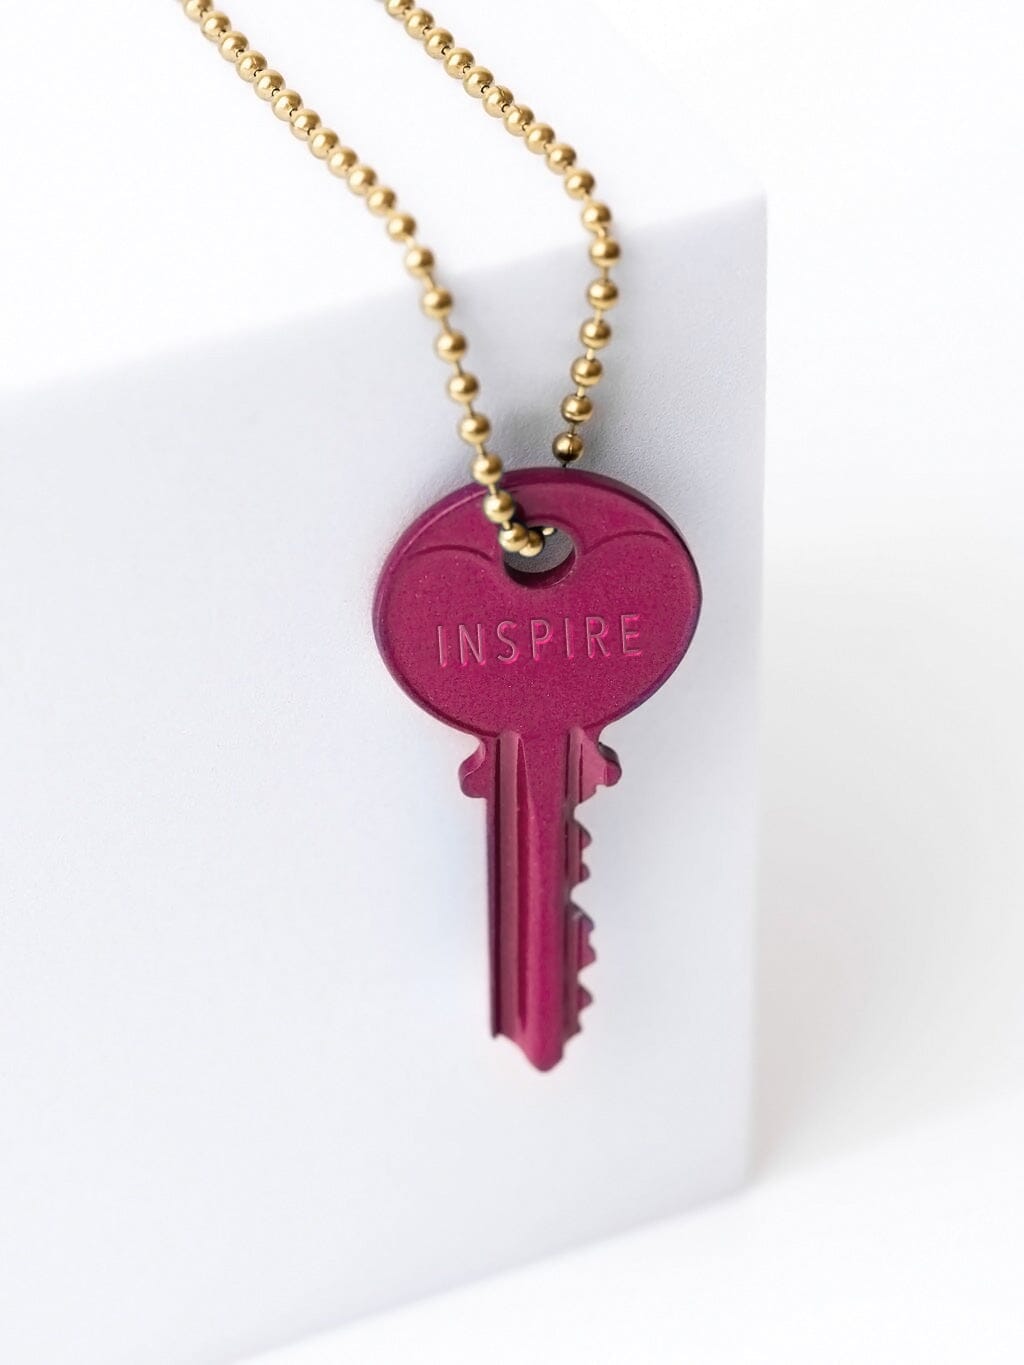 N - Magenta Classic Ball Chain Key Necklace Necklaces The Giving Keys 